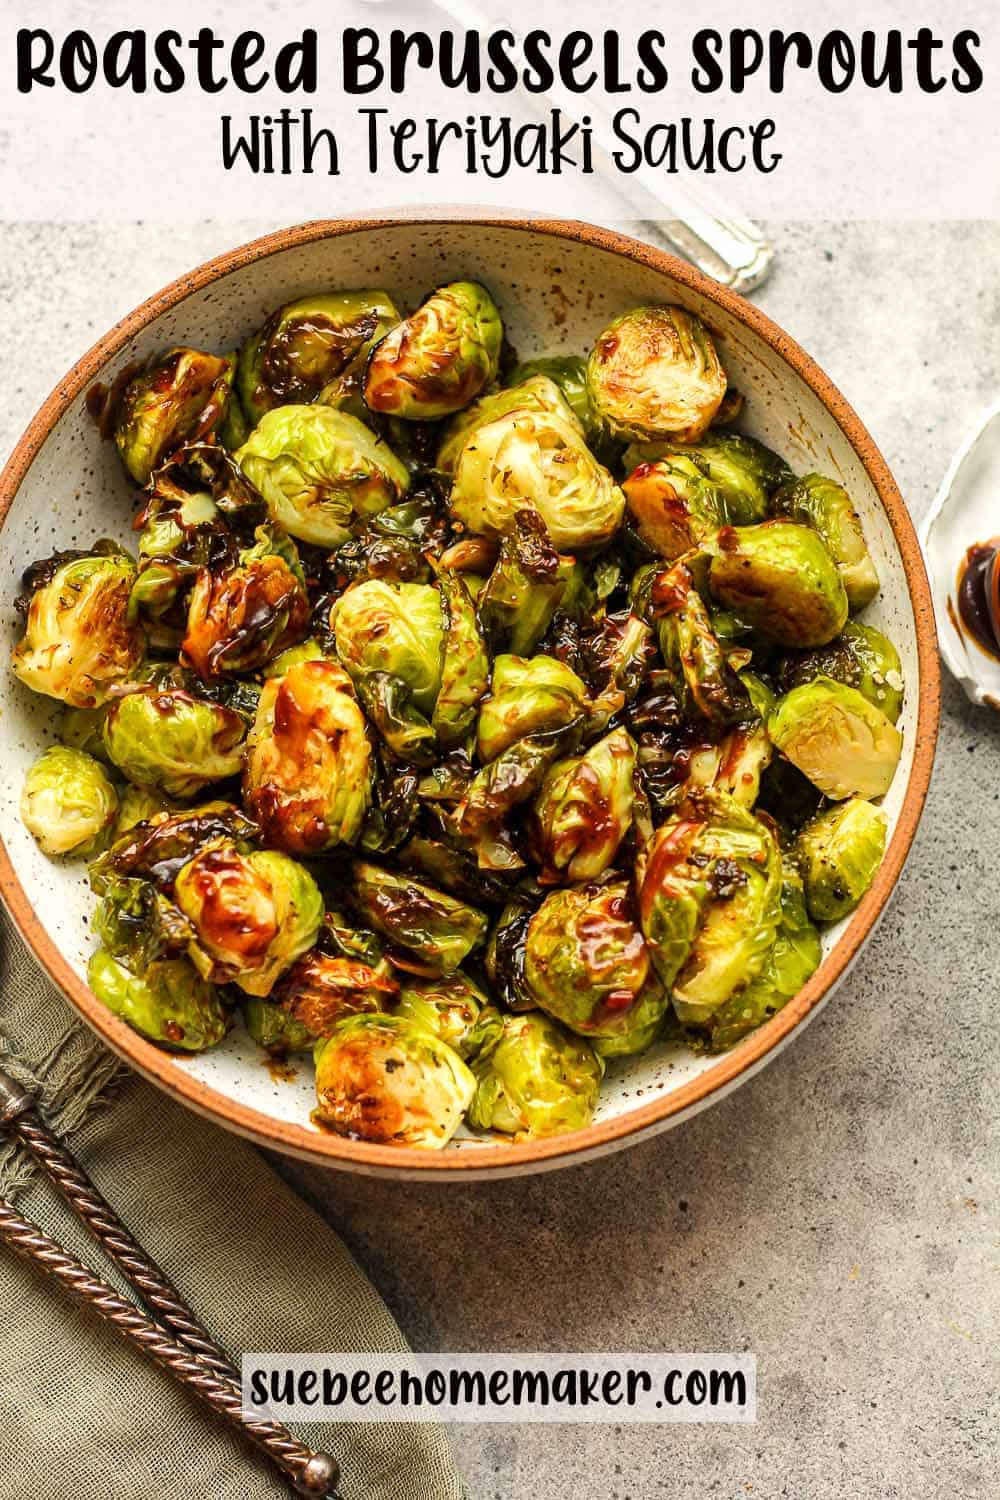 A bowl of roasted brussels sprouts with teriyaki sauce.